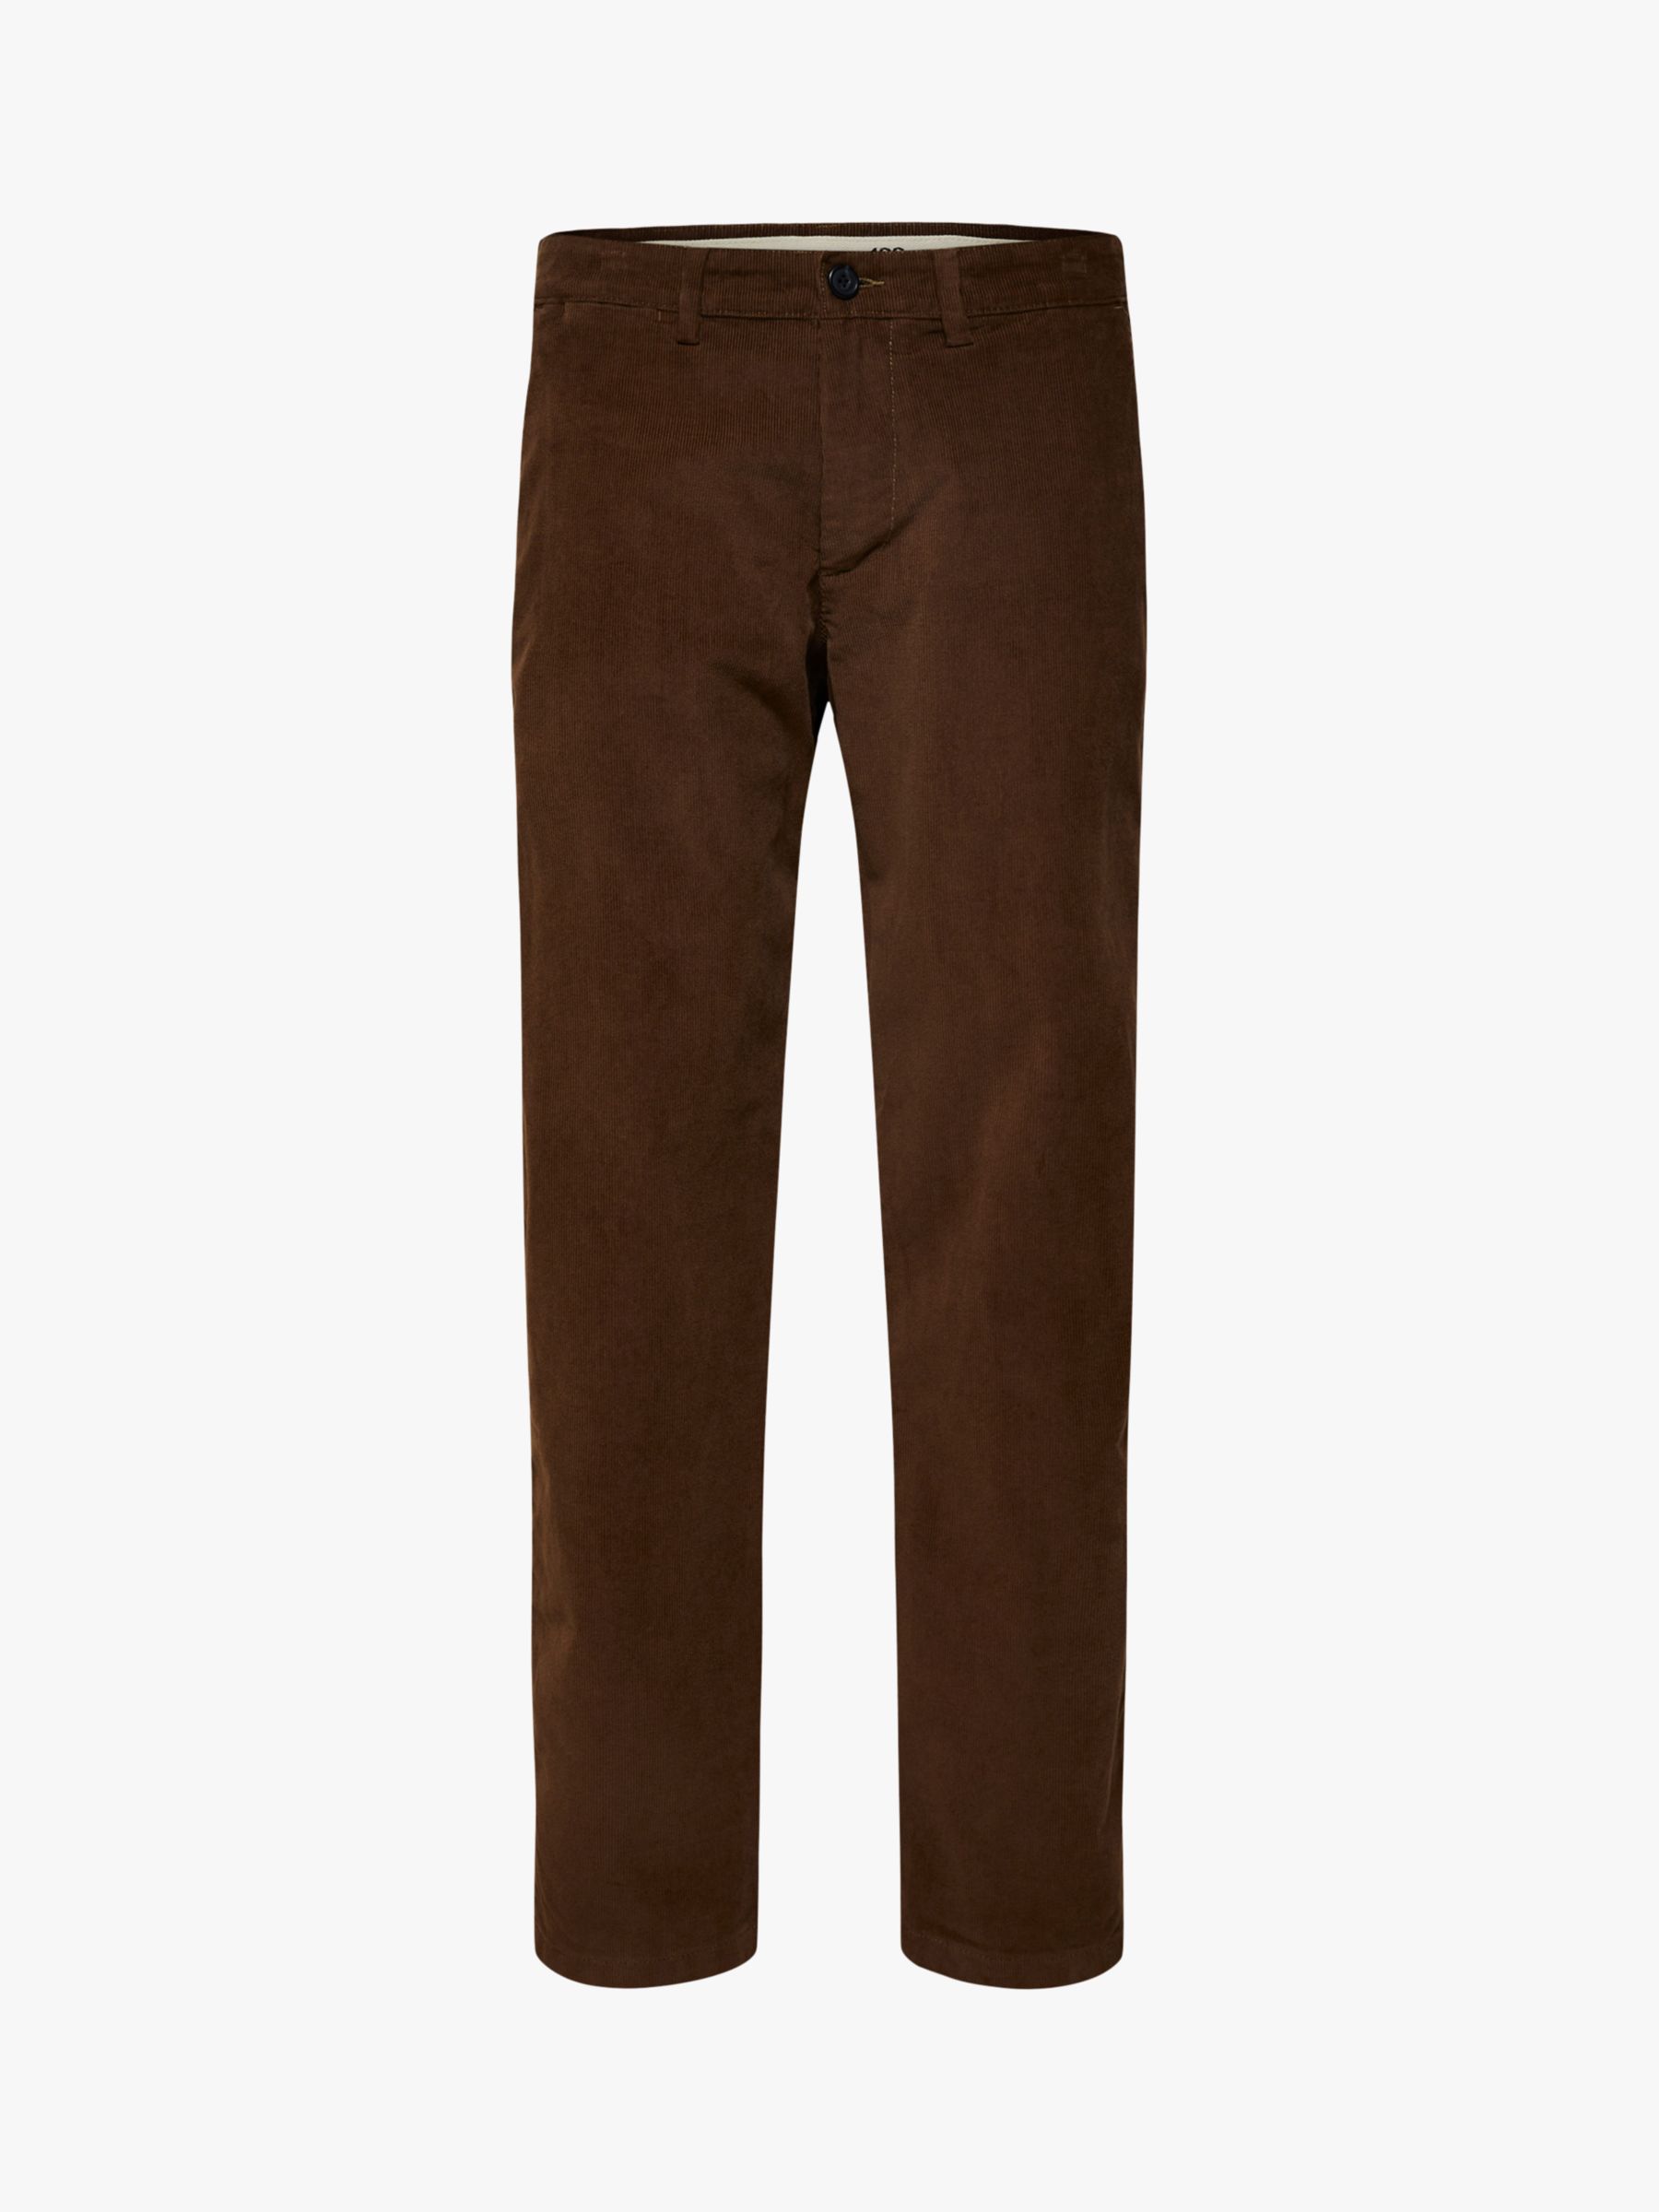 SELECTED HOMME Classic Chino Trousers, Dark Earth, 34R